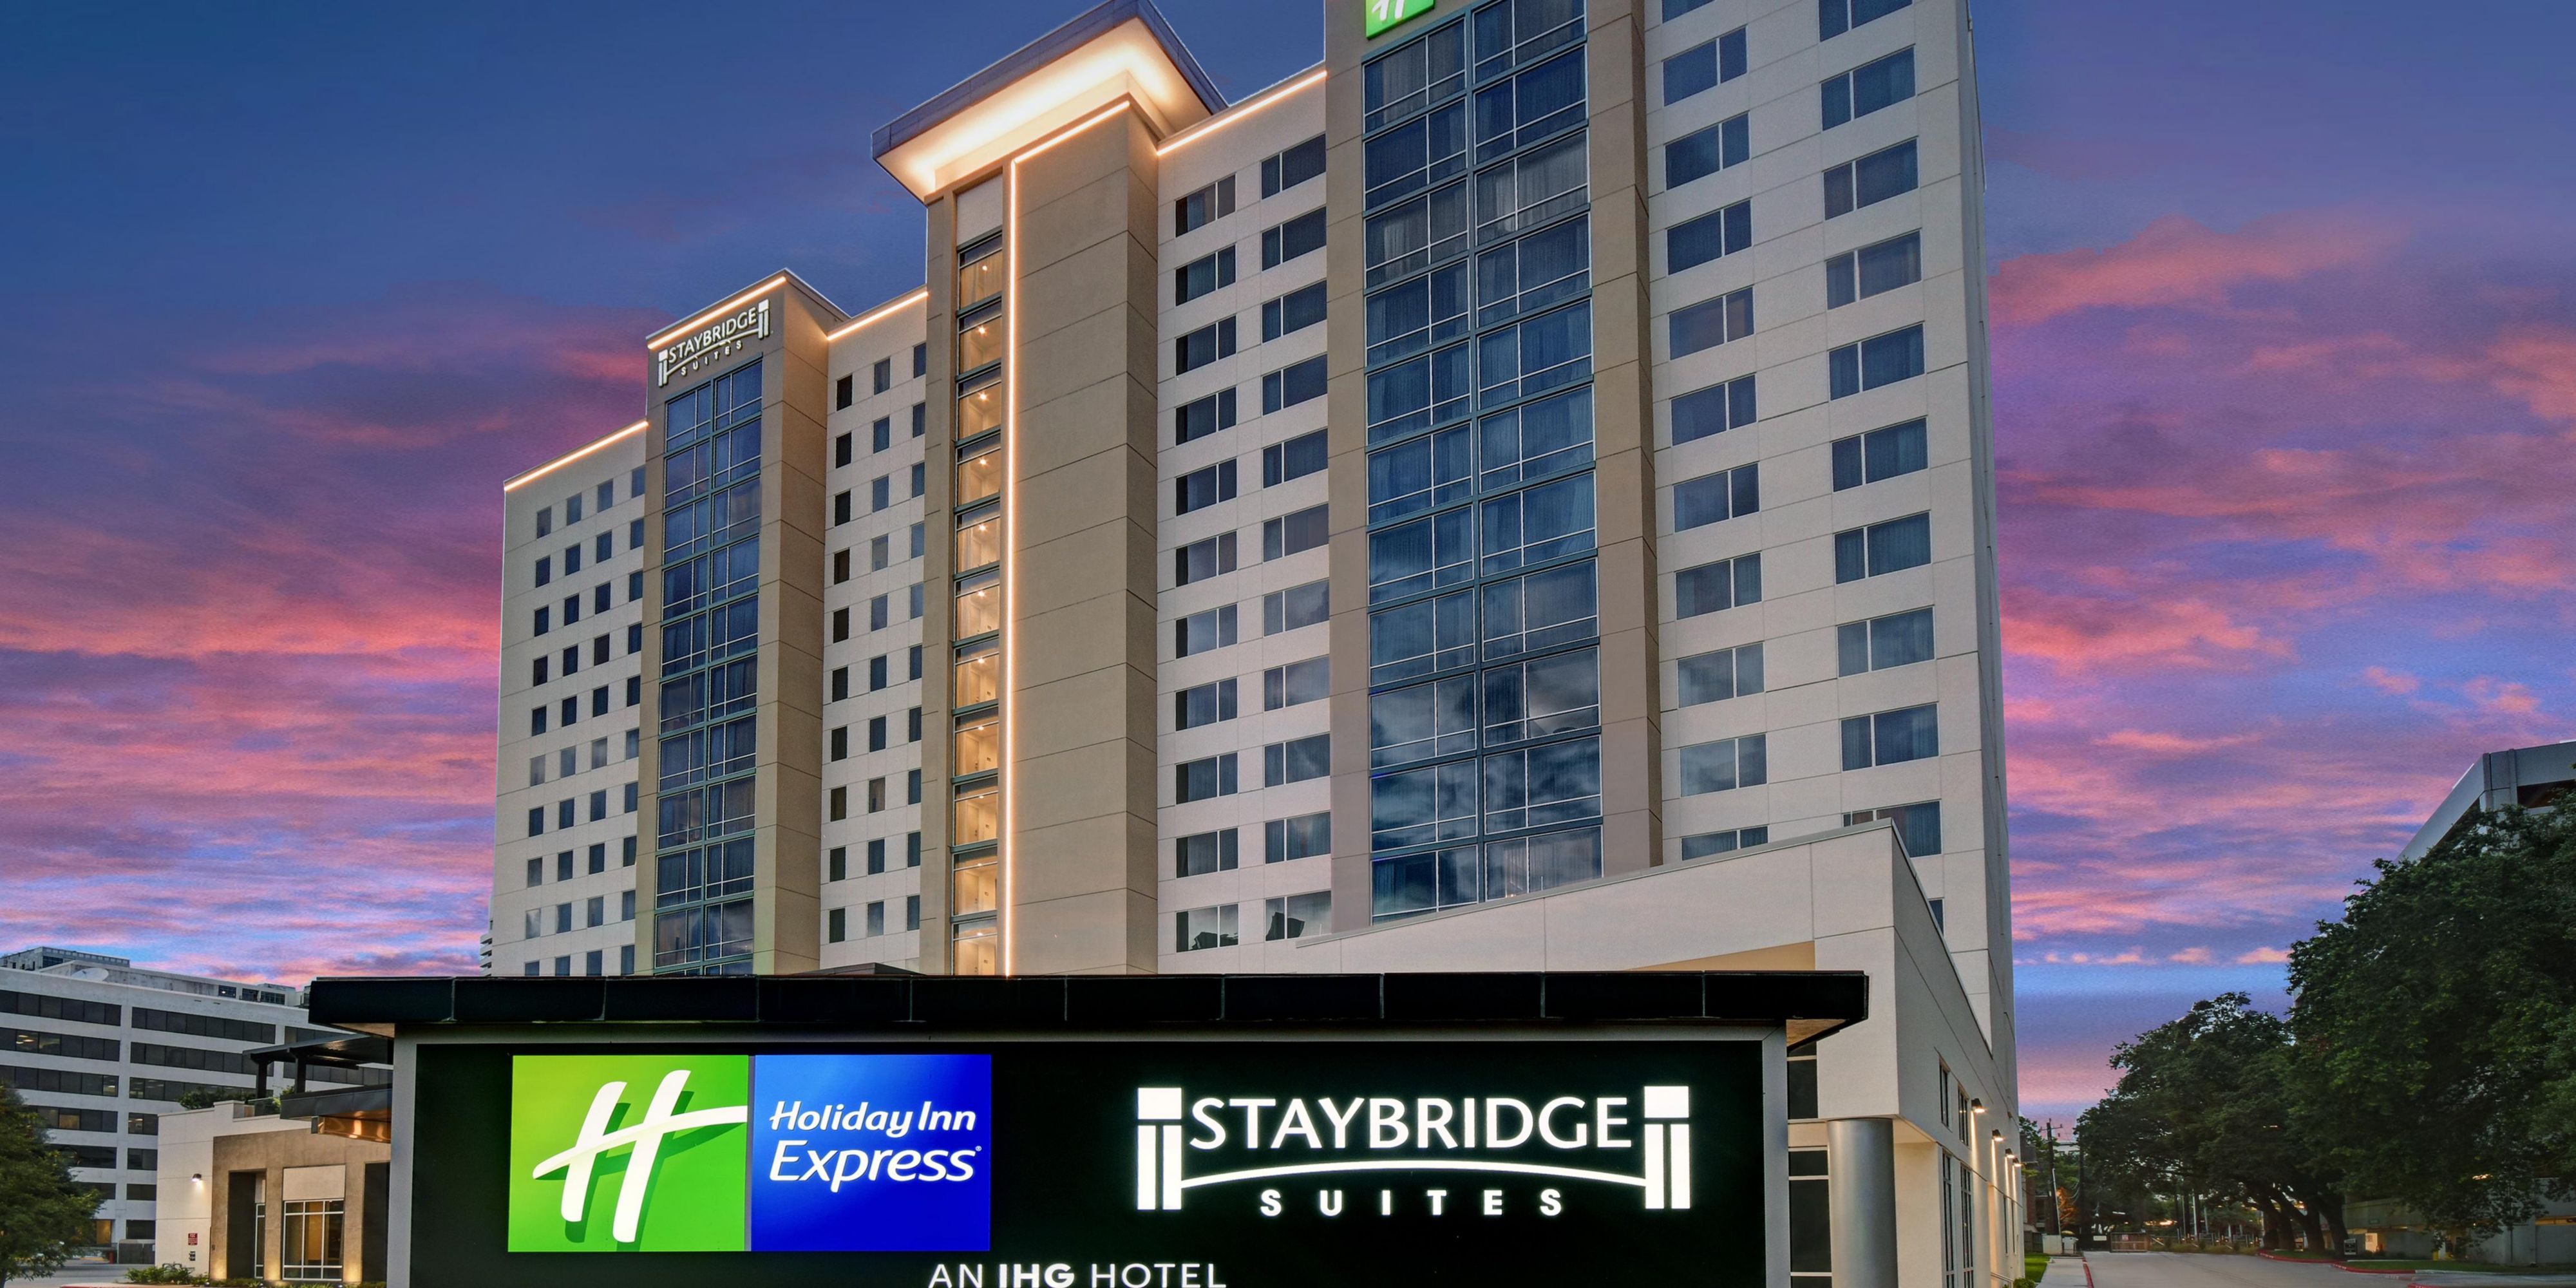 Welcome to the brand-new Dual brand Holiday Inn Express and Staybridge Suites Houston-Galleria Area. You’ll find comfort and modern luxury at one of the most prominent locations in Houston-Uptown and the Galleria area all under one roof! 